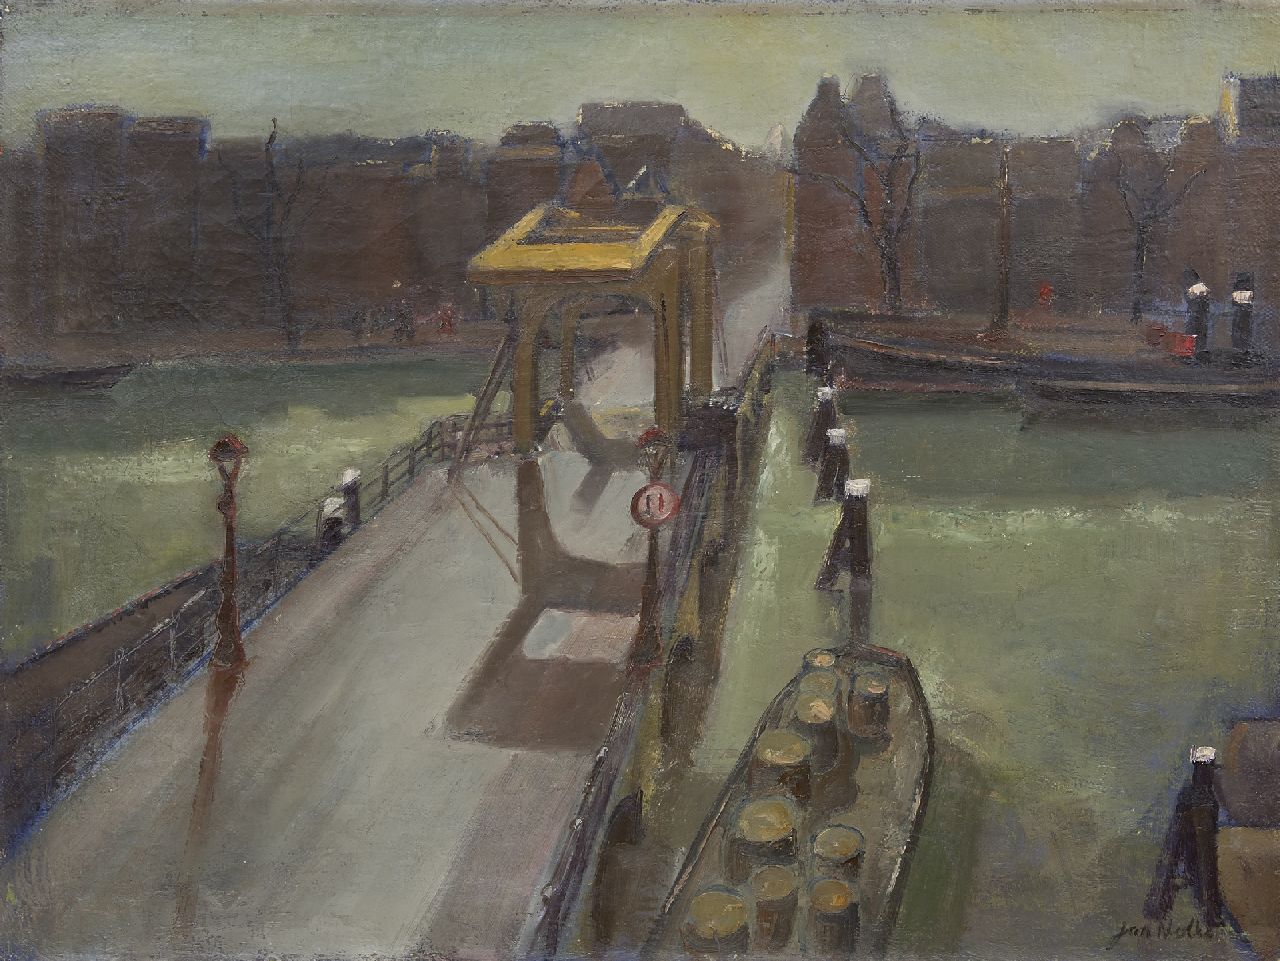 Nolte J.A.F.  | Johannes Albertus Franciscus 'Jan' Nolte, The Magere Brug, Amsterdam, oil on canvas 60.5 x 80.3 cm, signed l.r. and verso